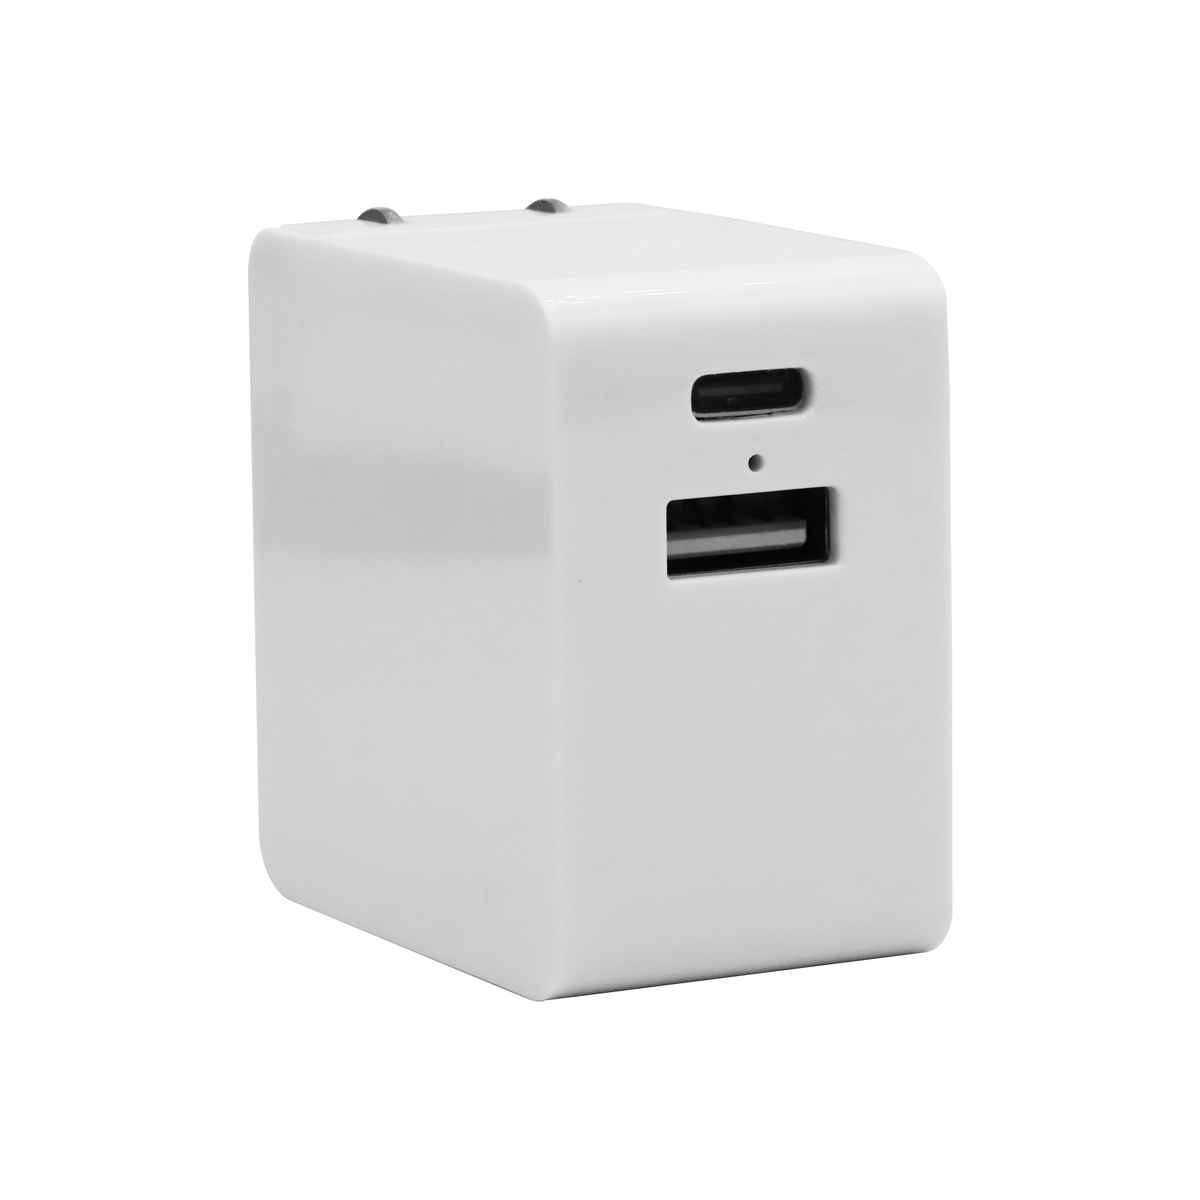 1. LM-J075 3.1A USB-A and Type-C Wall Charger Bulk Purchase and Corporate purchase from China Union Power -Description-